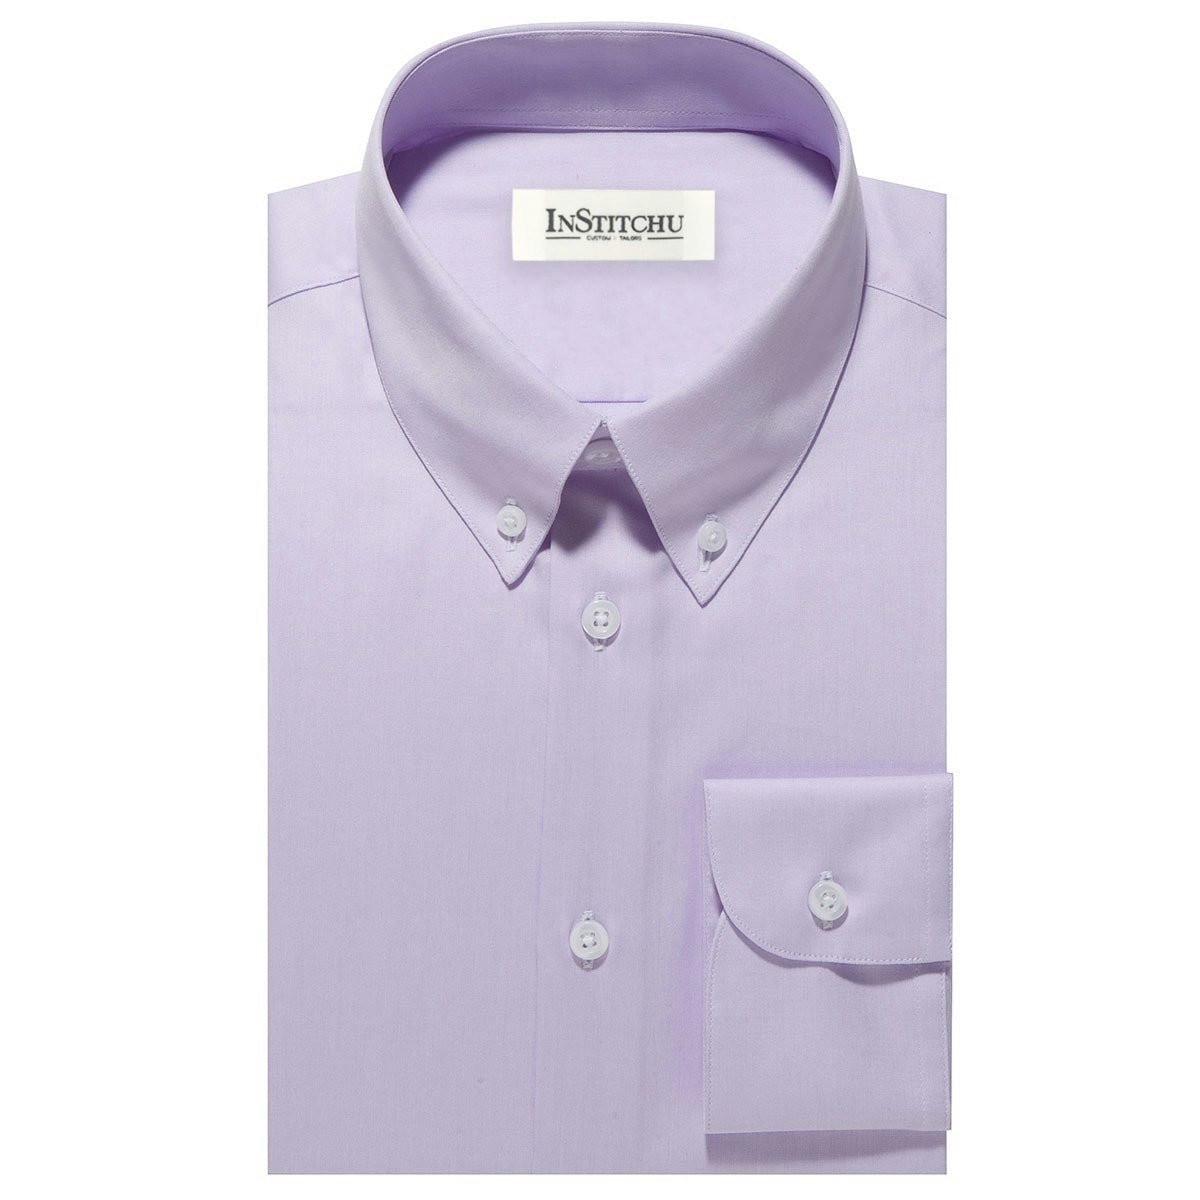 InStitchu Collection The Henlopen Lilac Shirt